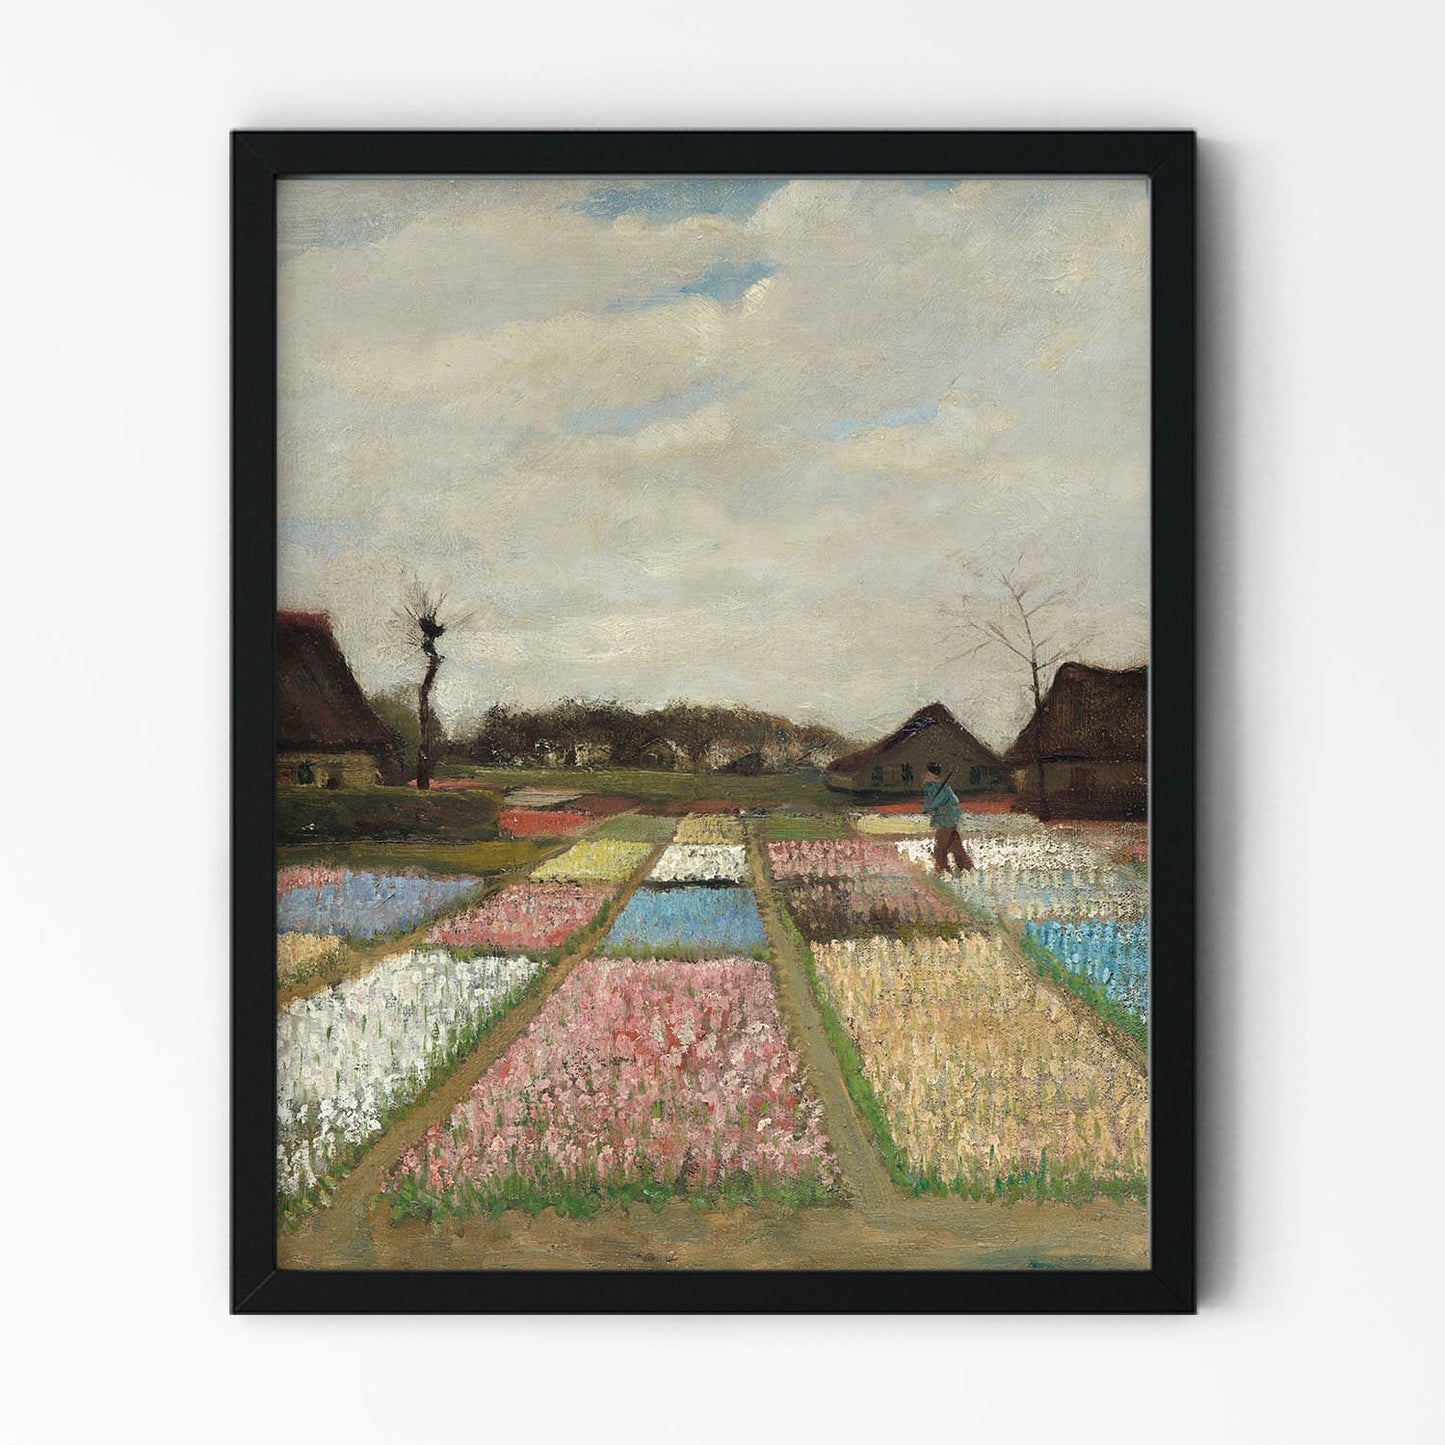 Antique Field of Flowers Oil Painting in Black Picture Frame